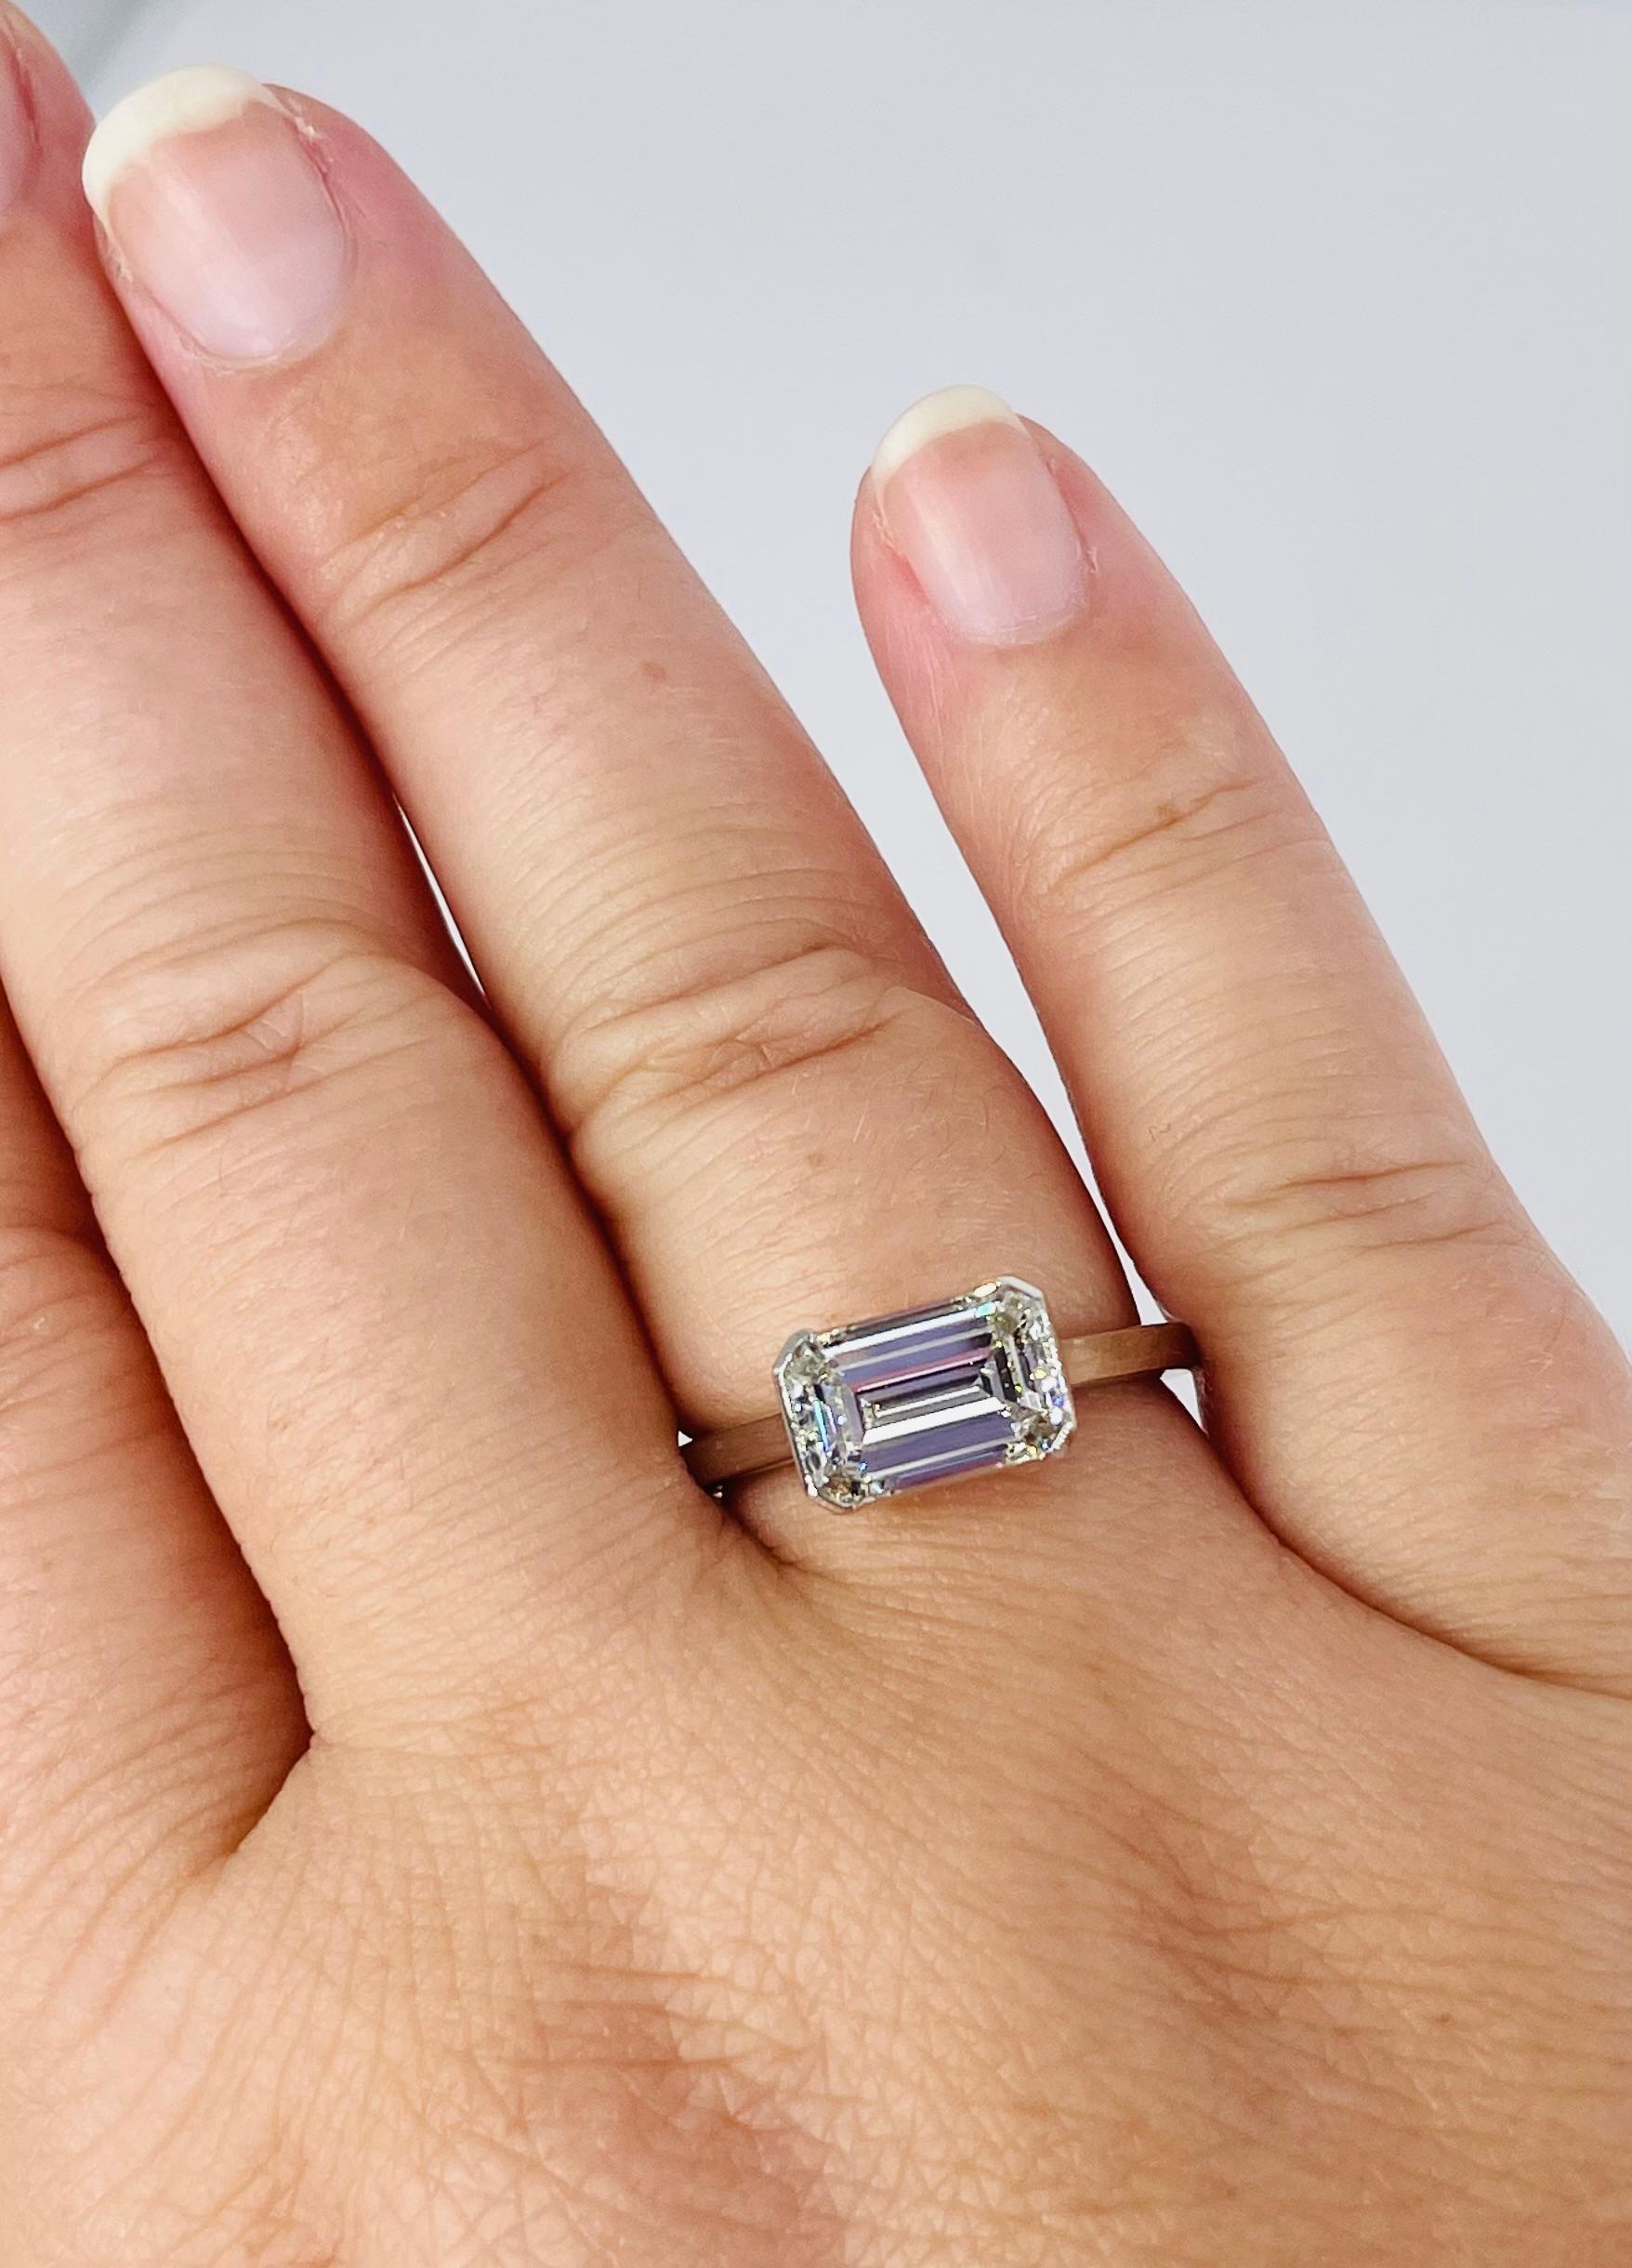 Sleek and sophisticated, this modern take on the classic solitaire is unique yet timeless. The 2.01 carat emerald cut diamond is certified by GIA as I color and VS1 clarity. The diamond is white and has a lively sparkle, and there are no visible